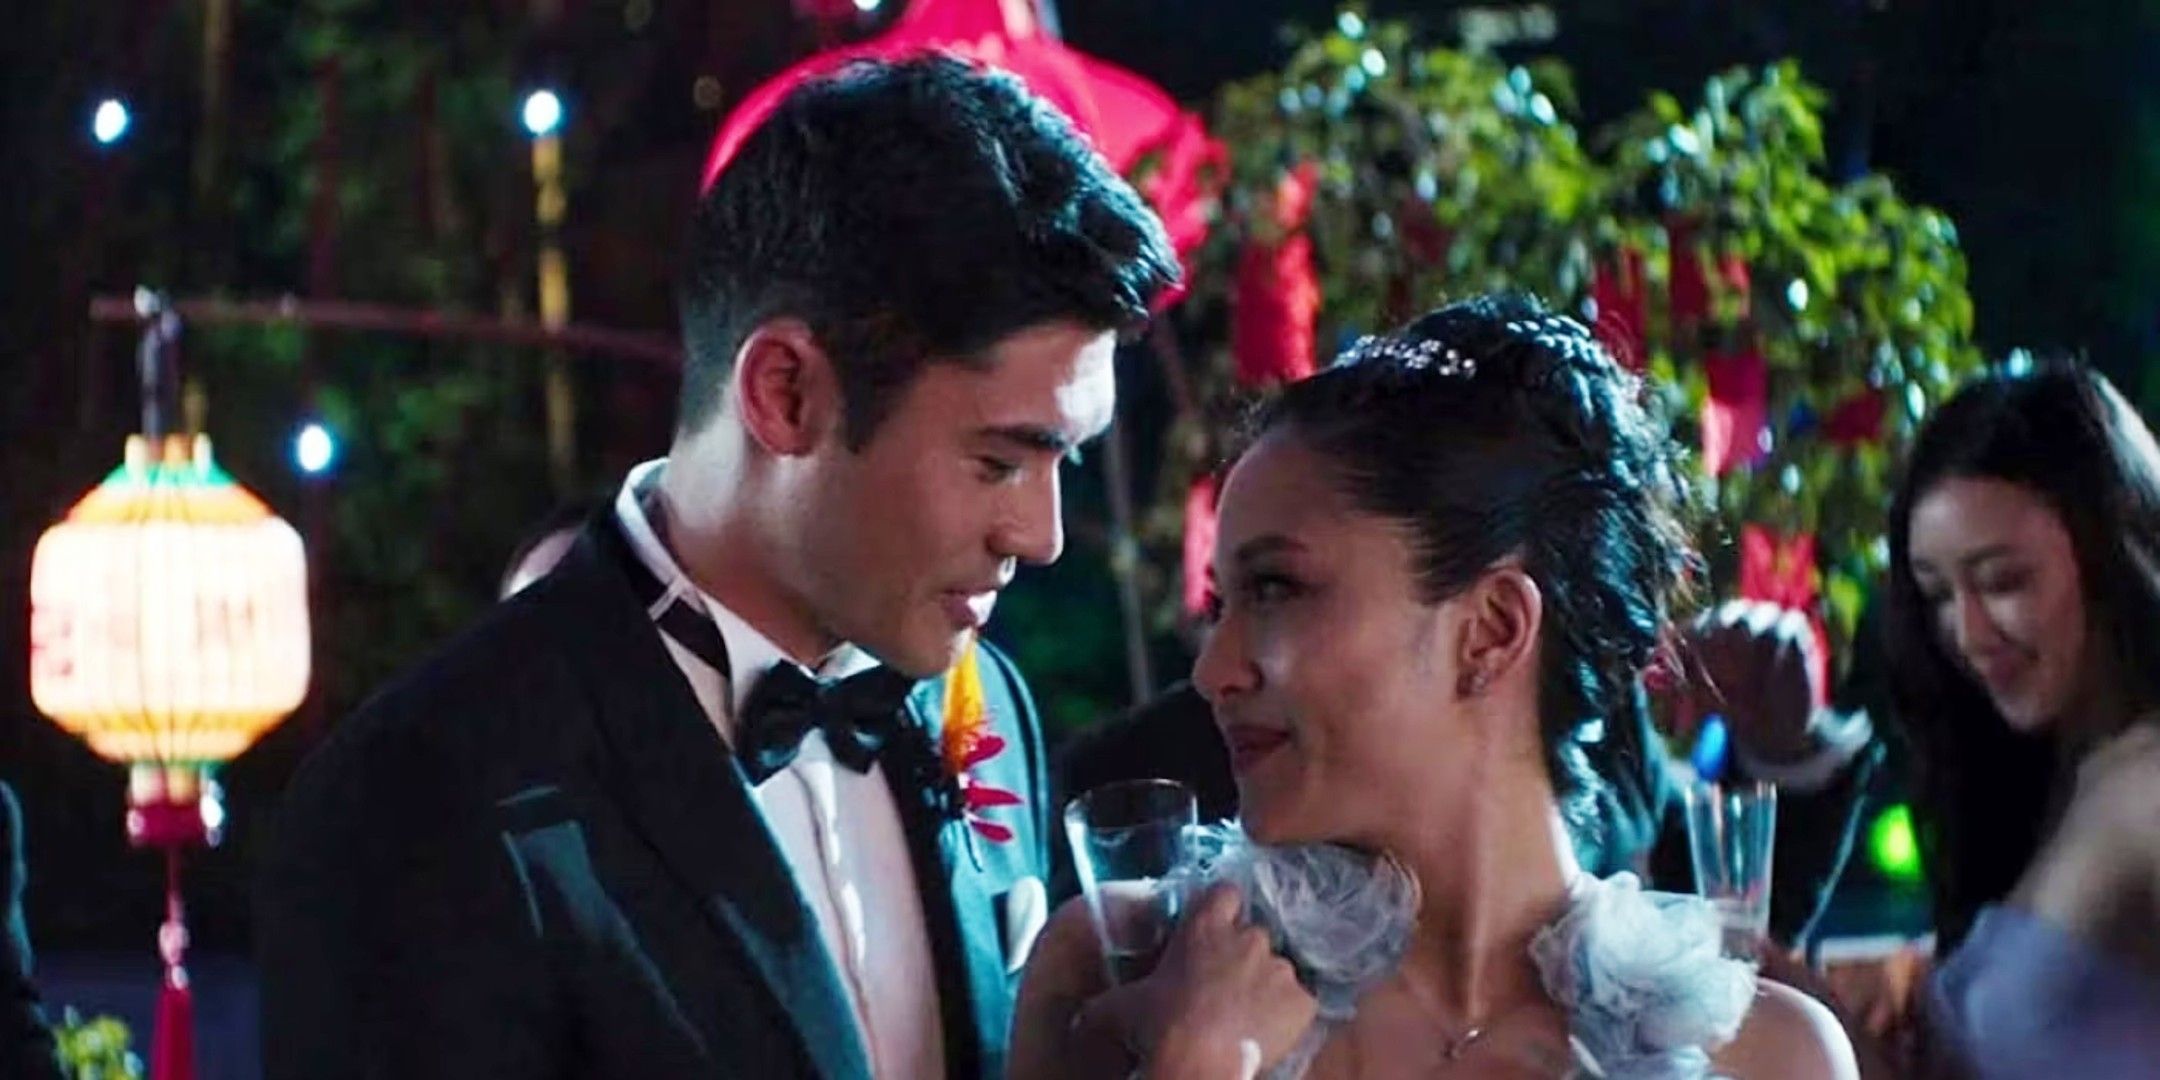 Constance Wu As Rachel Chu & Henry Golding As Nick Young In Crazy Rich Asians